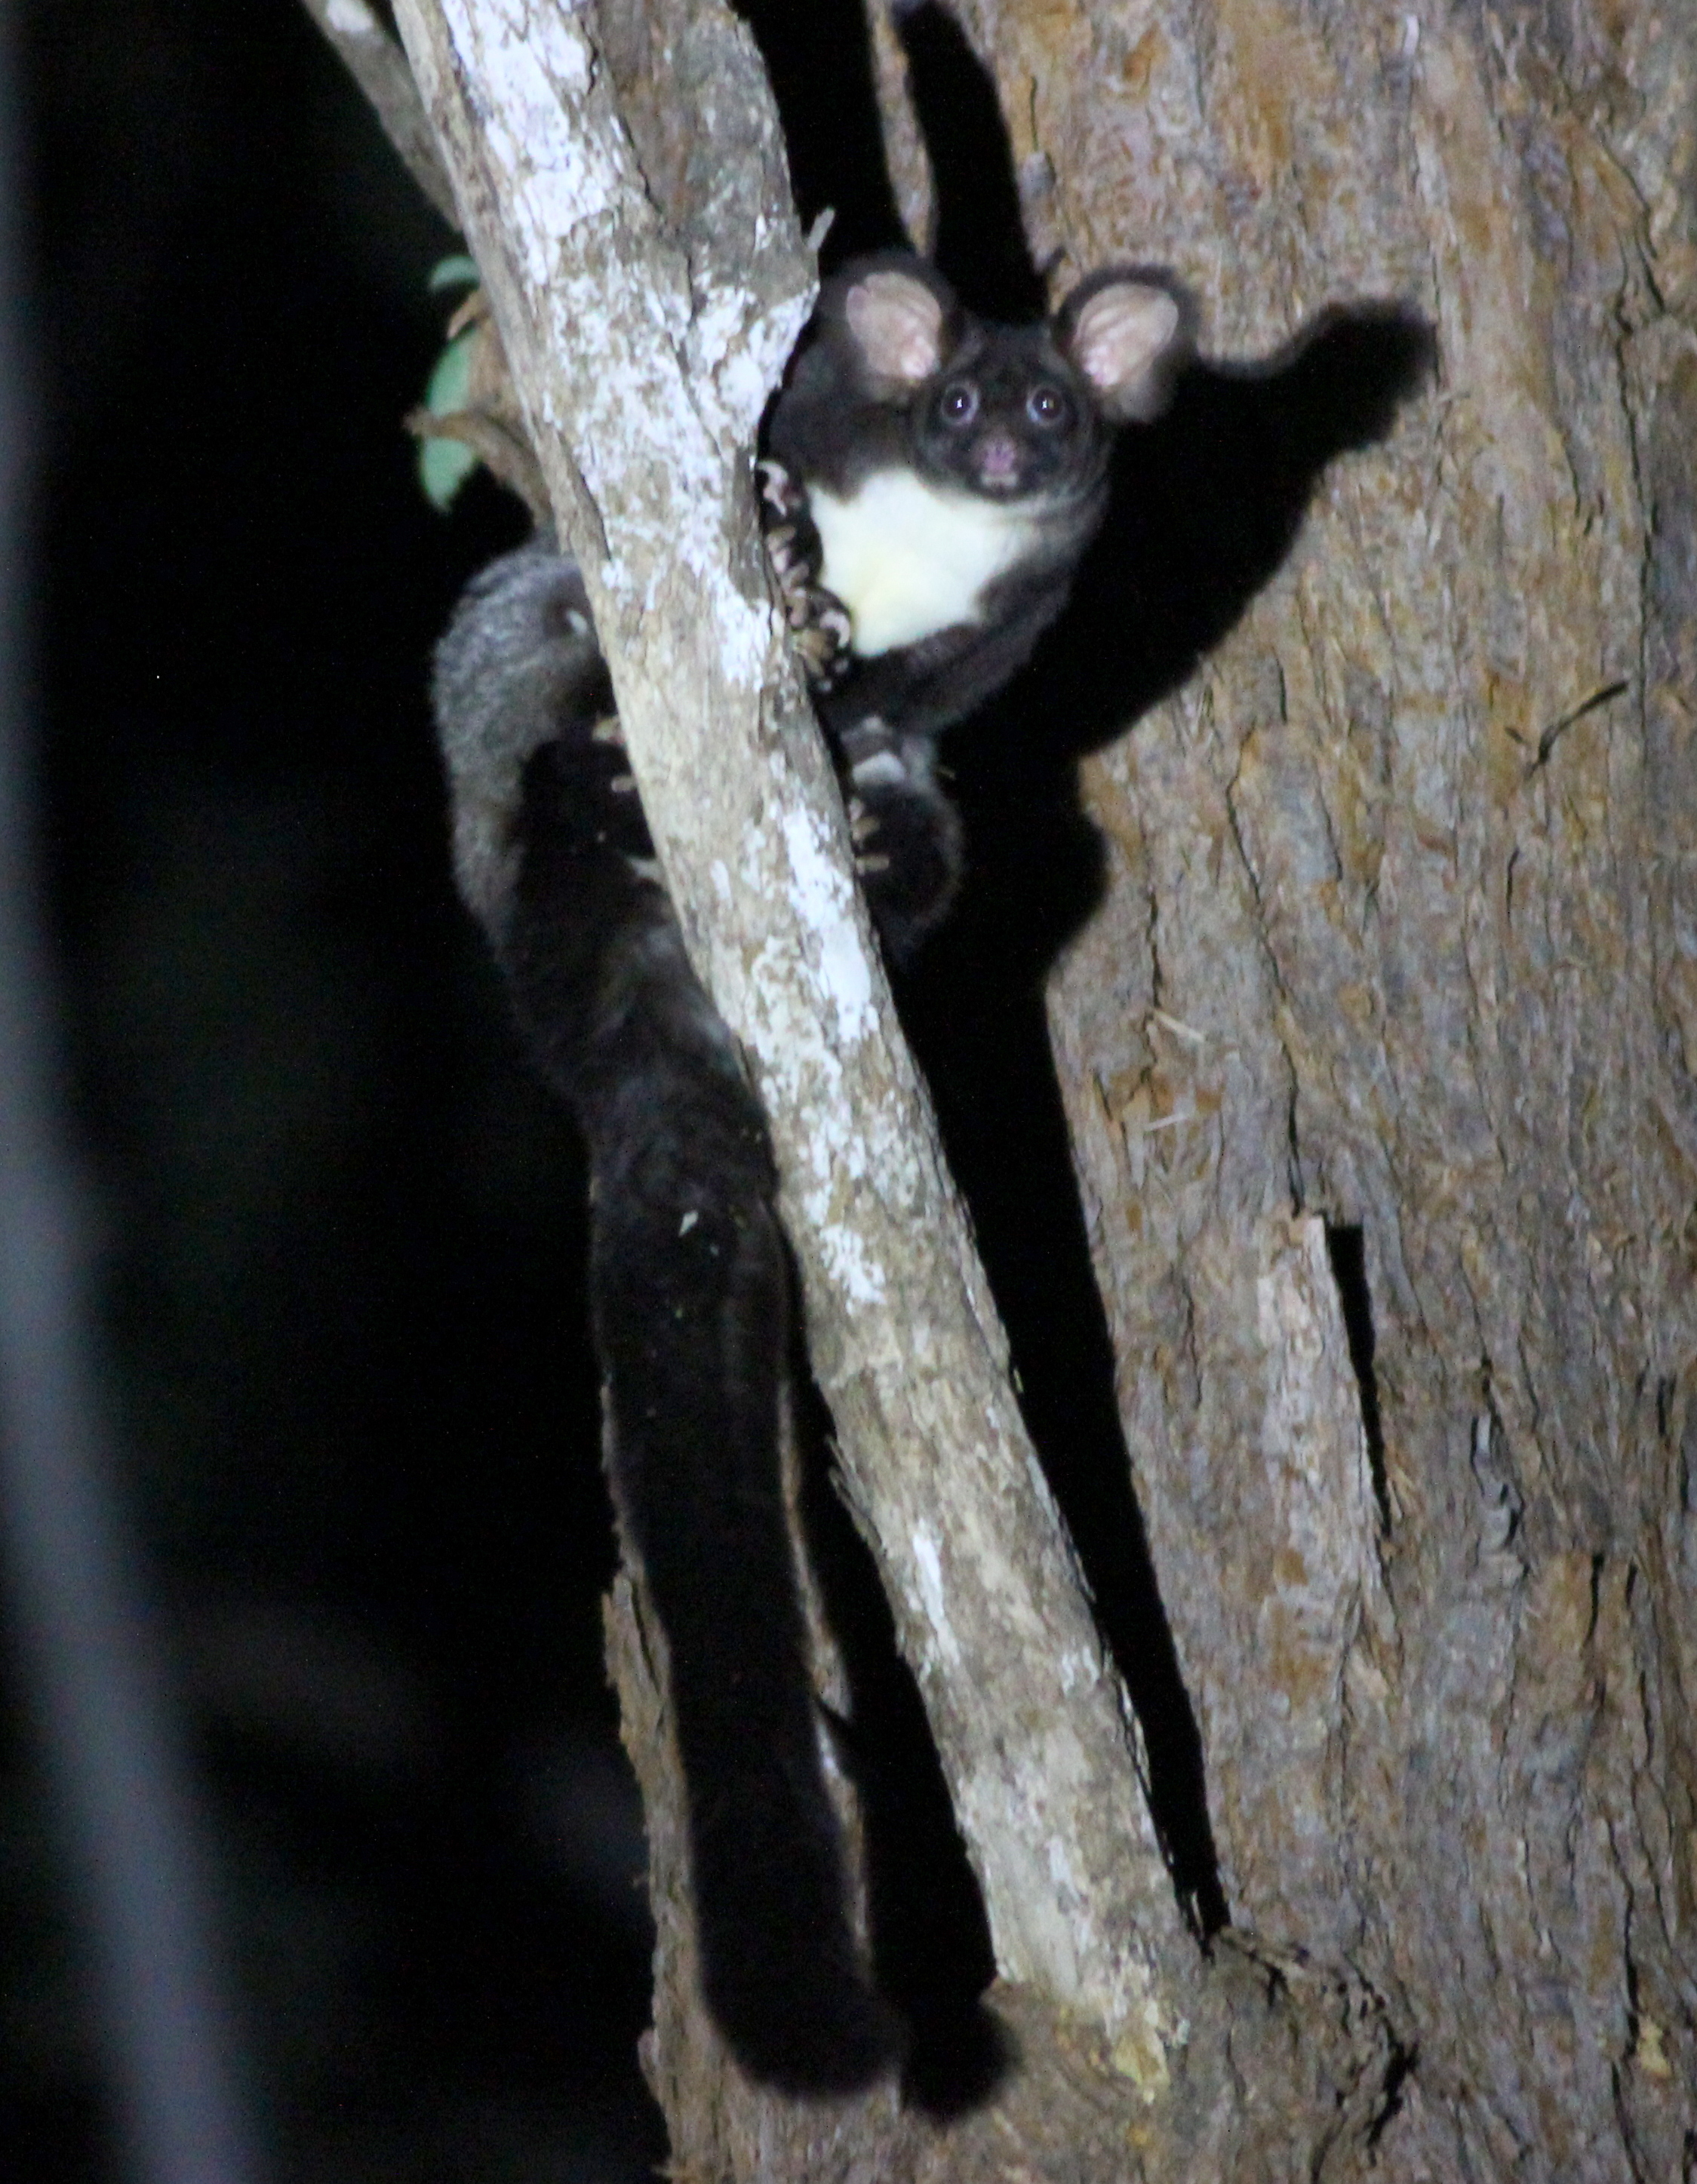 Greater Glider @ Glenreagh Jpg Lachlan Copeland Permission To Use